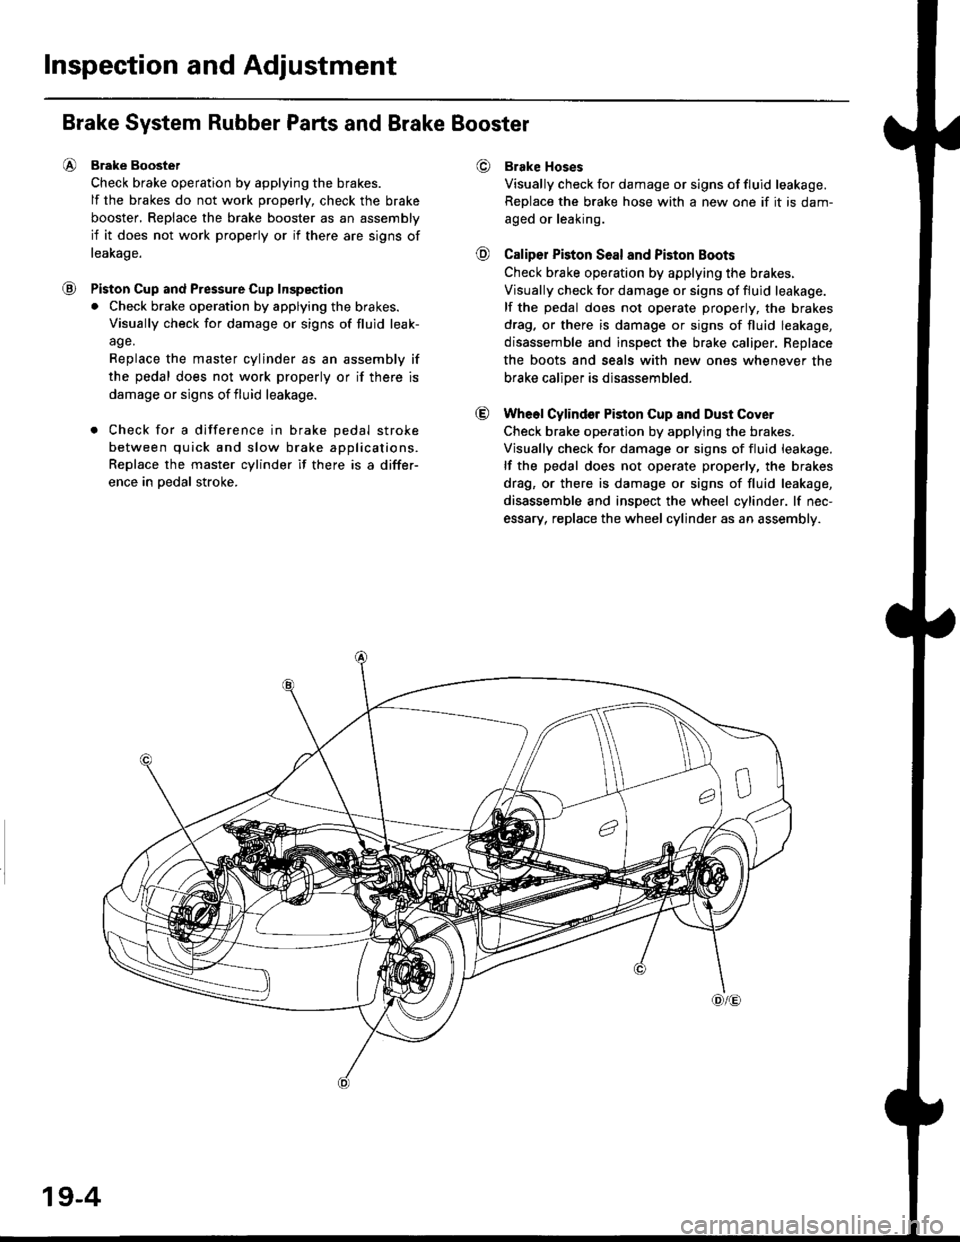 HONDA CIVIC 1996 6.G Workshop Manual Inspection and Adjustment
€)
@
@
@
Brake System Rubber Parts and Brake Booster
Brake Boostet
Check brake operation by applying the brakes.
lf the brakes do not work properly, check the brake
booster